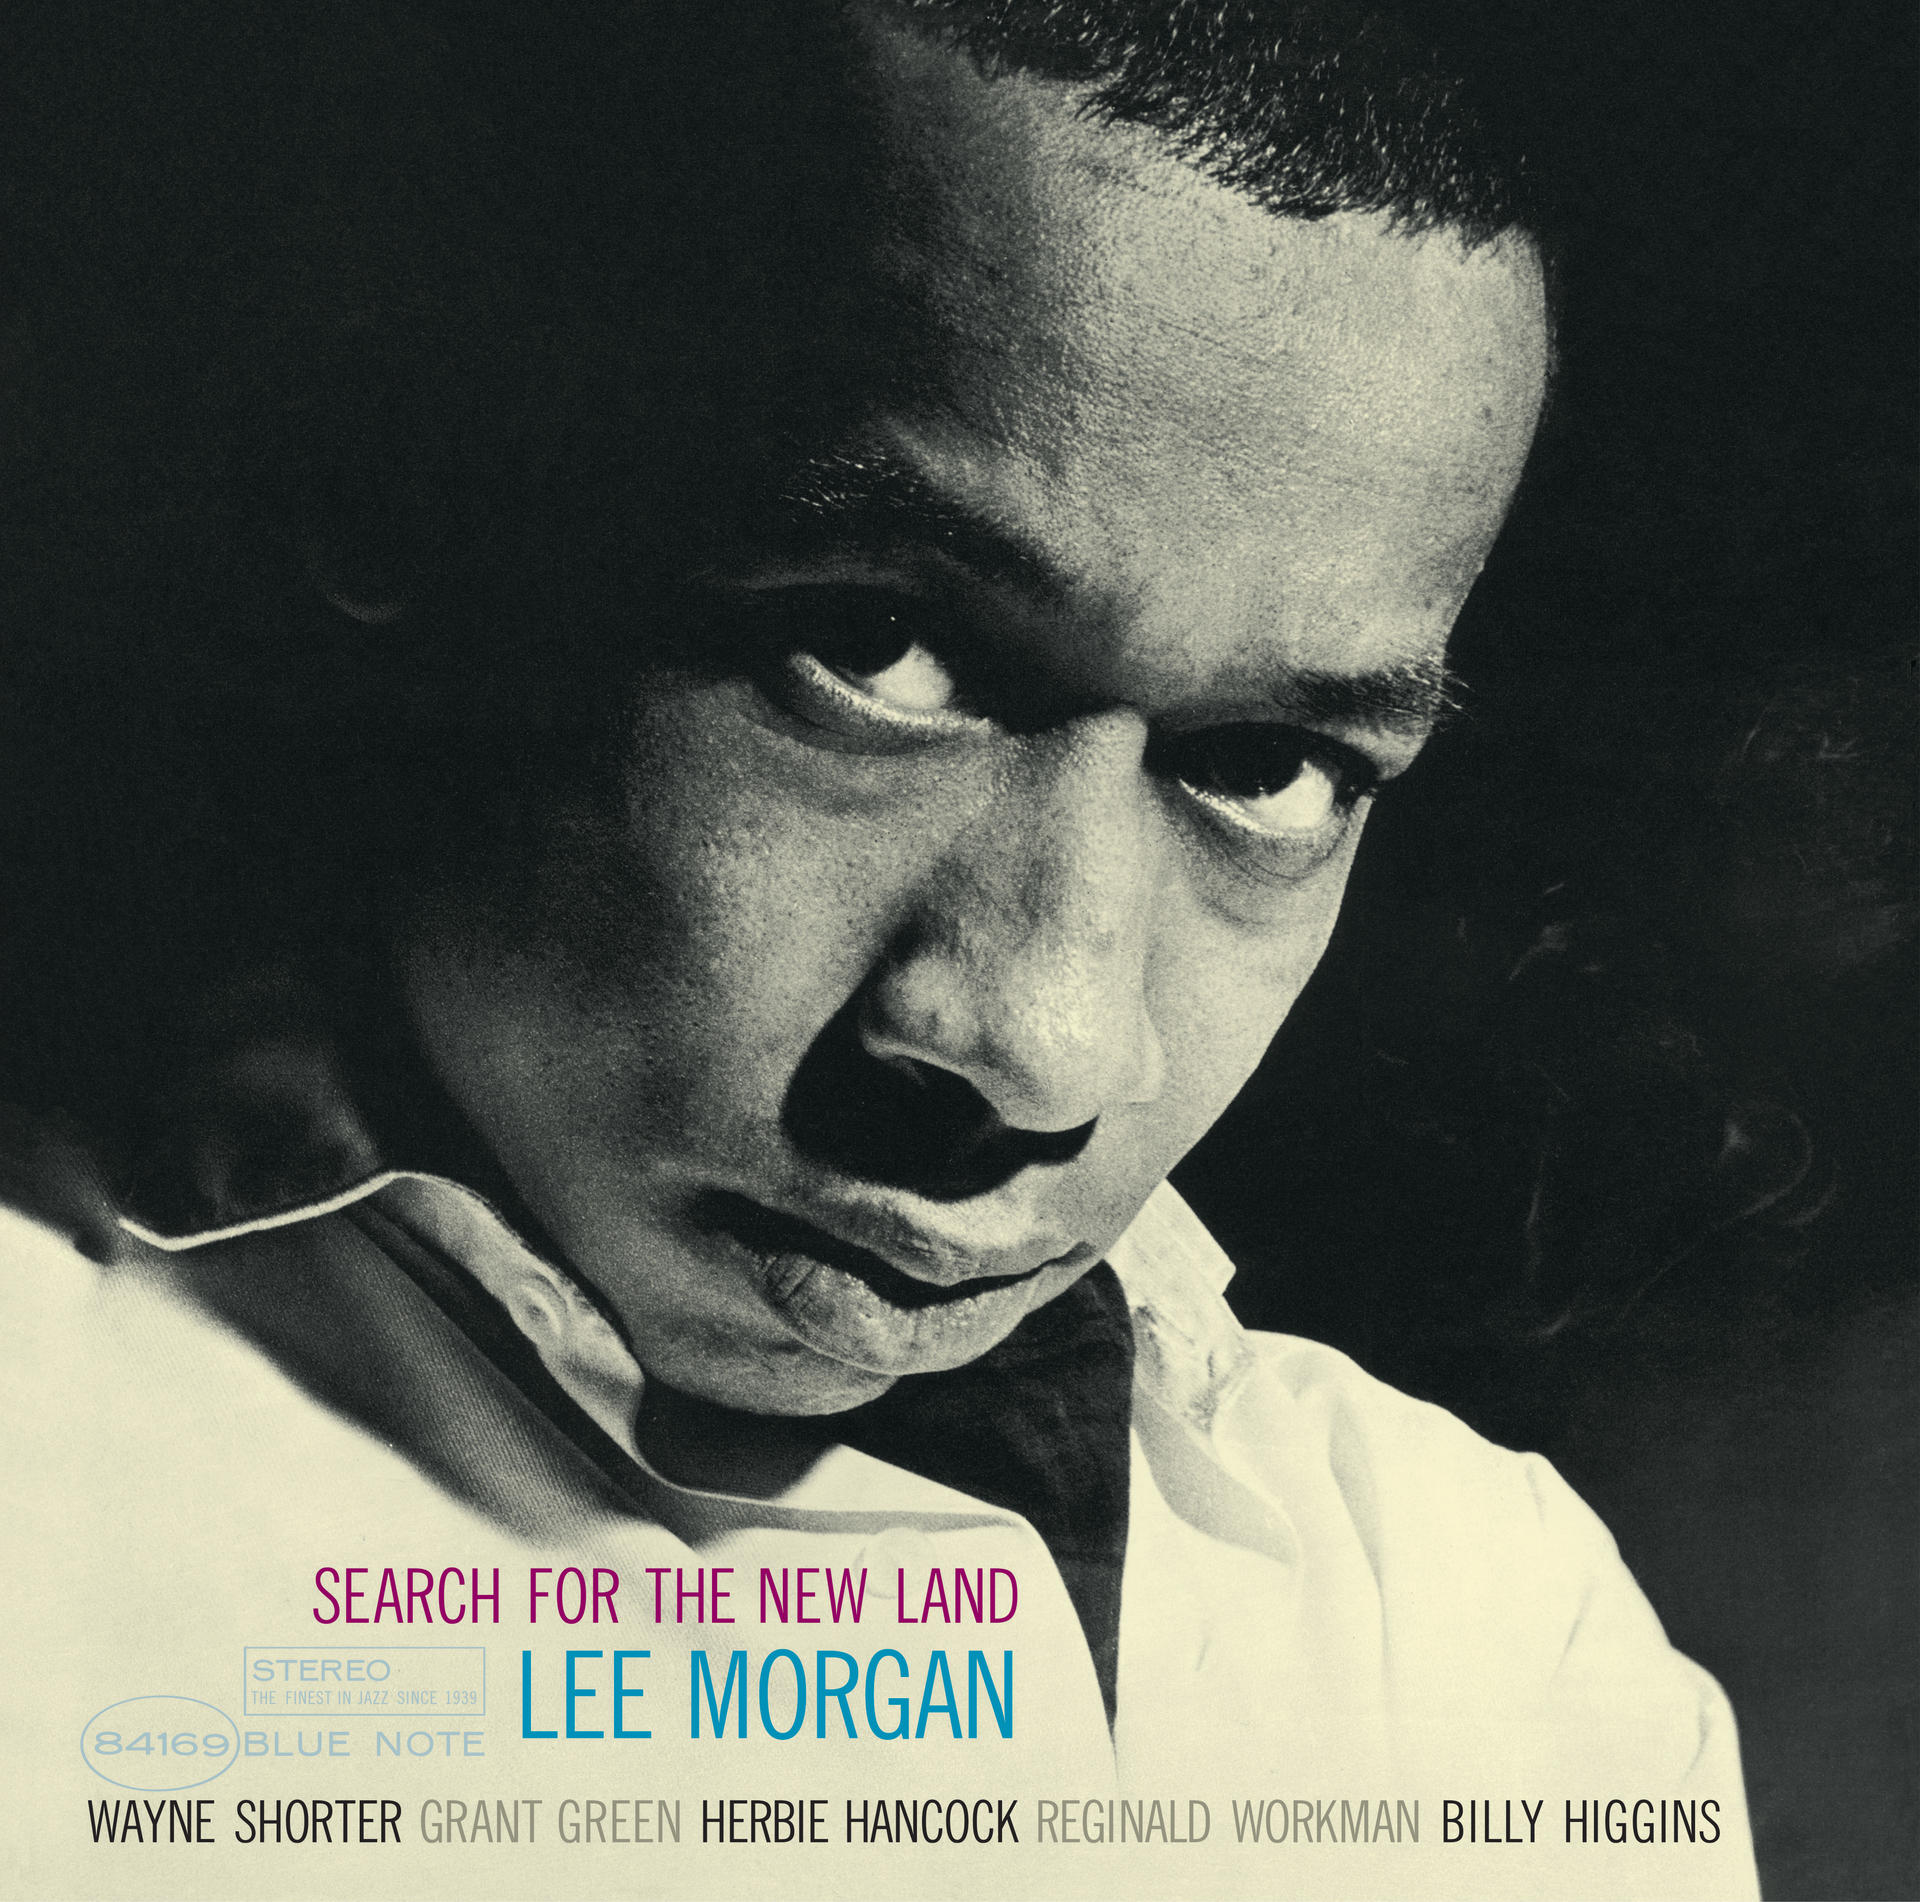 - - Lee Morgan (Vinyl) New Land for the Search